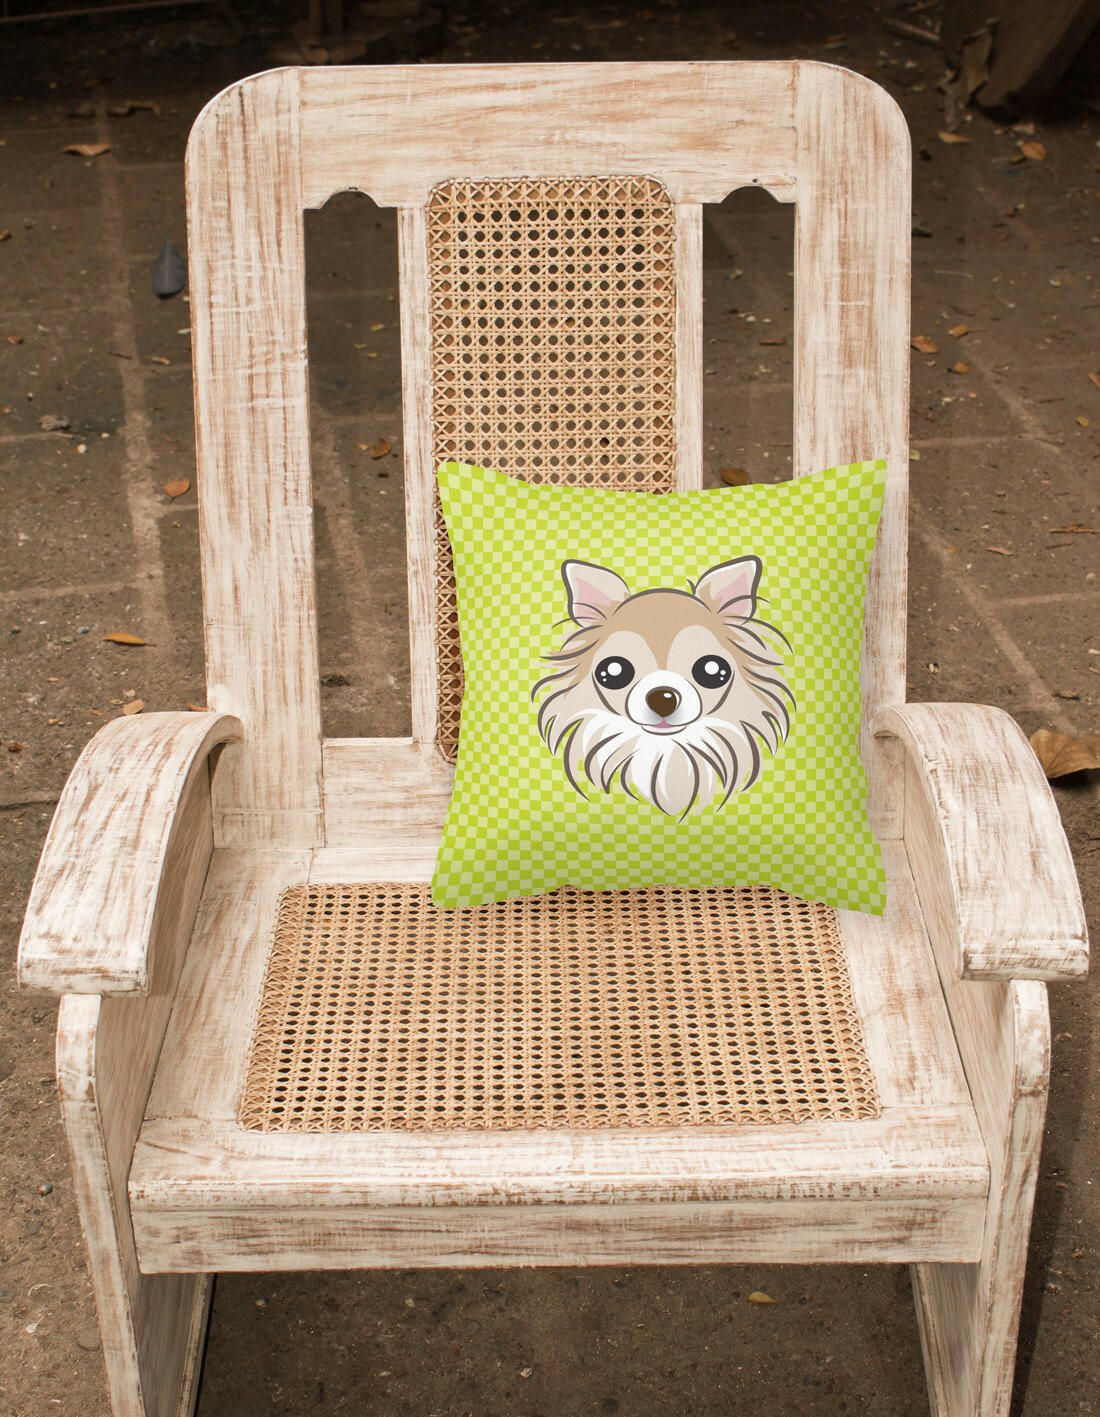 Checkerboard Lime Green Chihuahua Canvas Fabric Decorative Pillow BB1313PW1414 - the-store.com